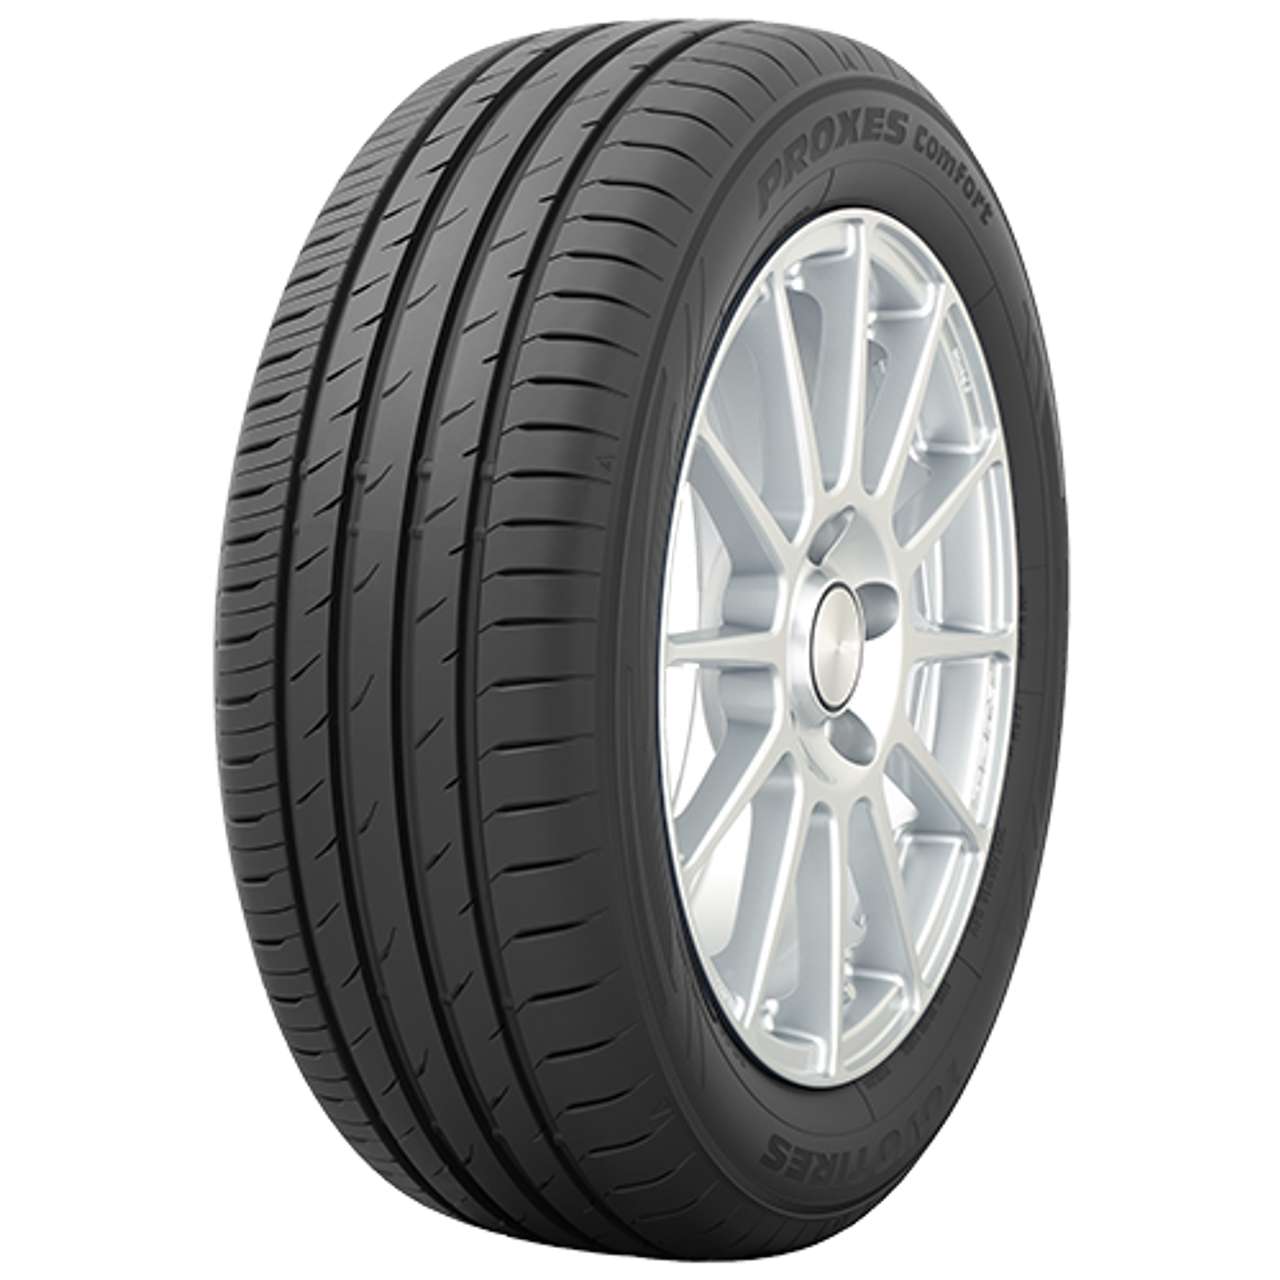 TOYO PROXES COMFORT SUV 235/55R18 100V BSW